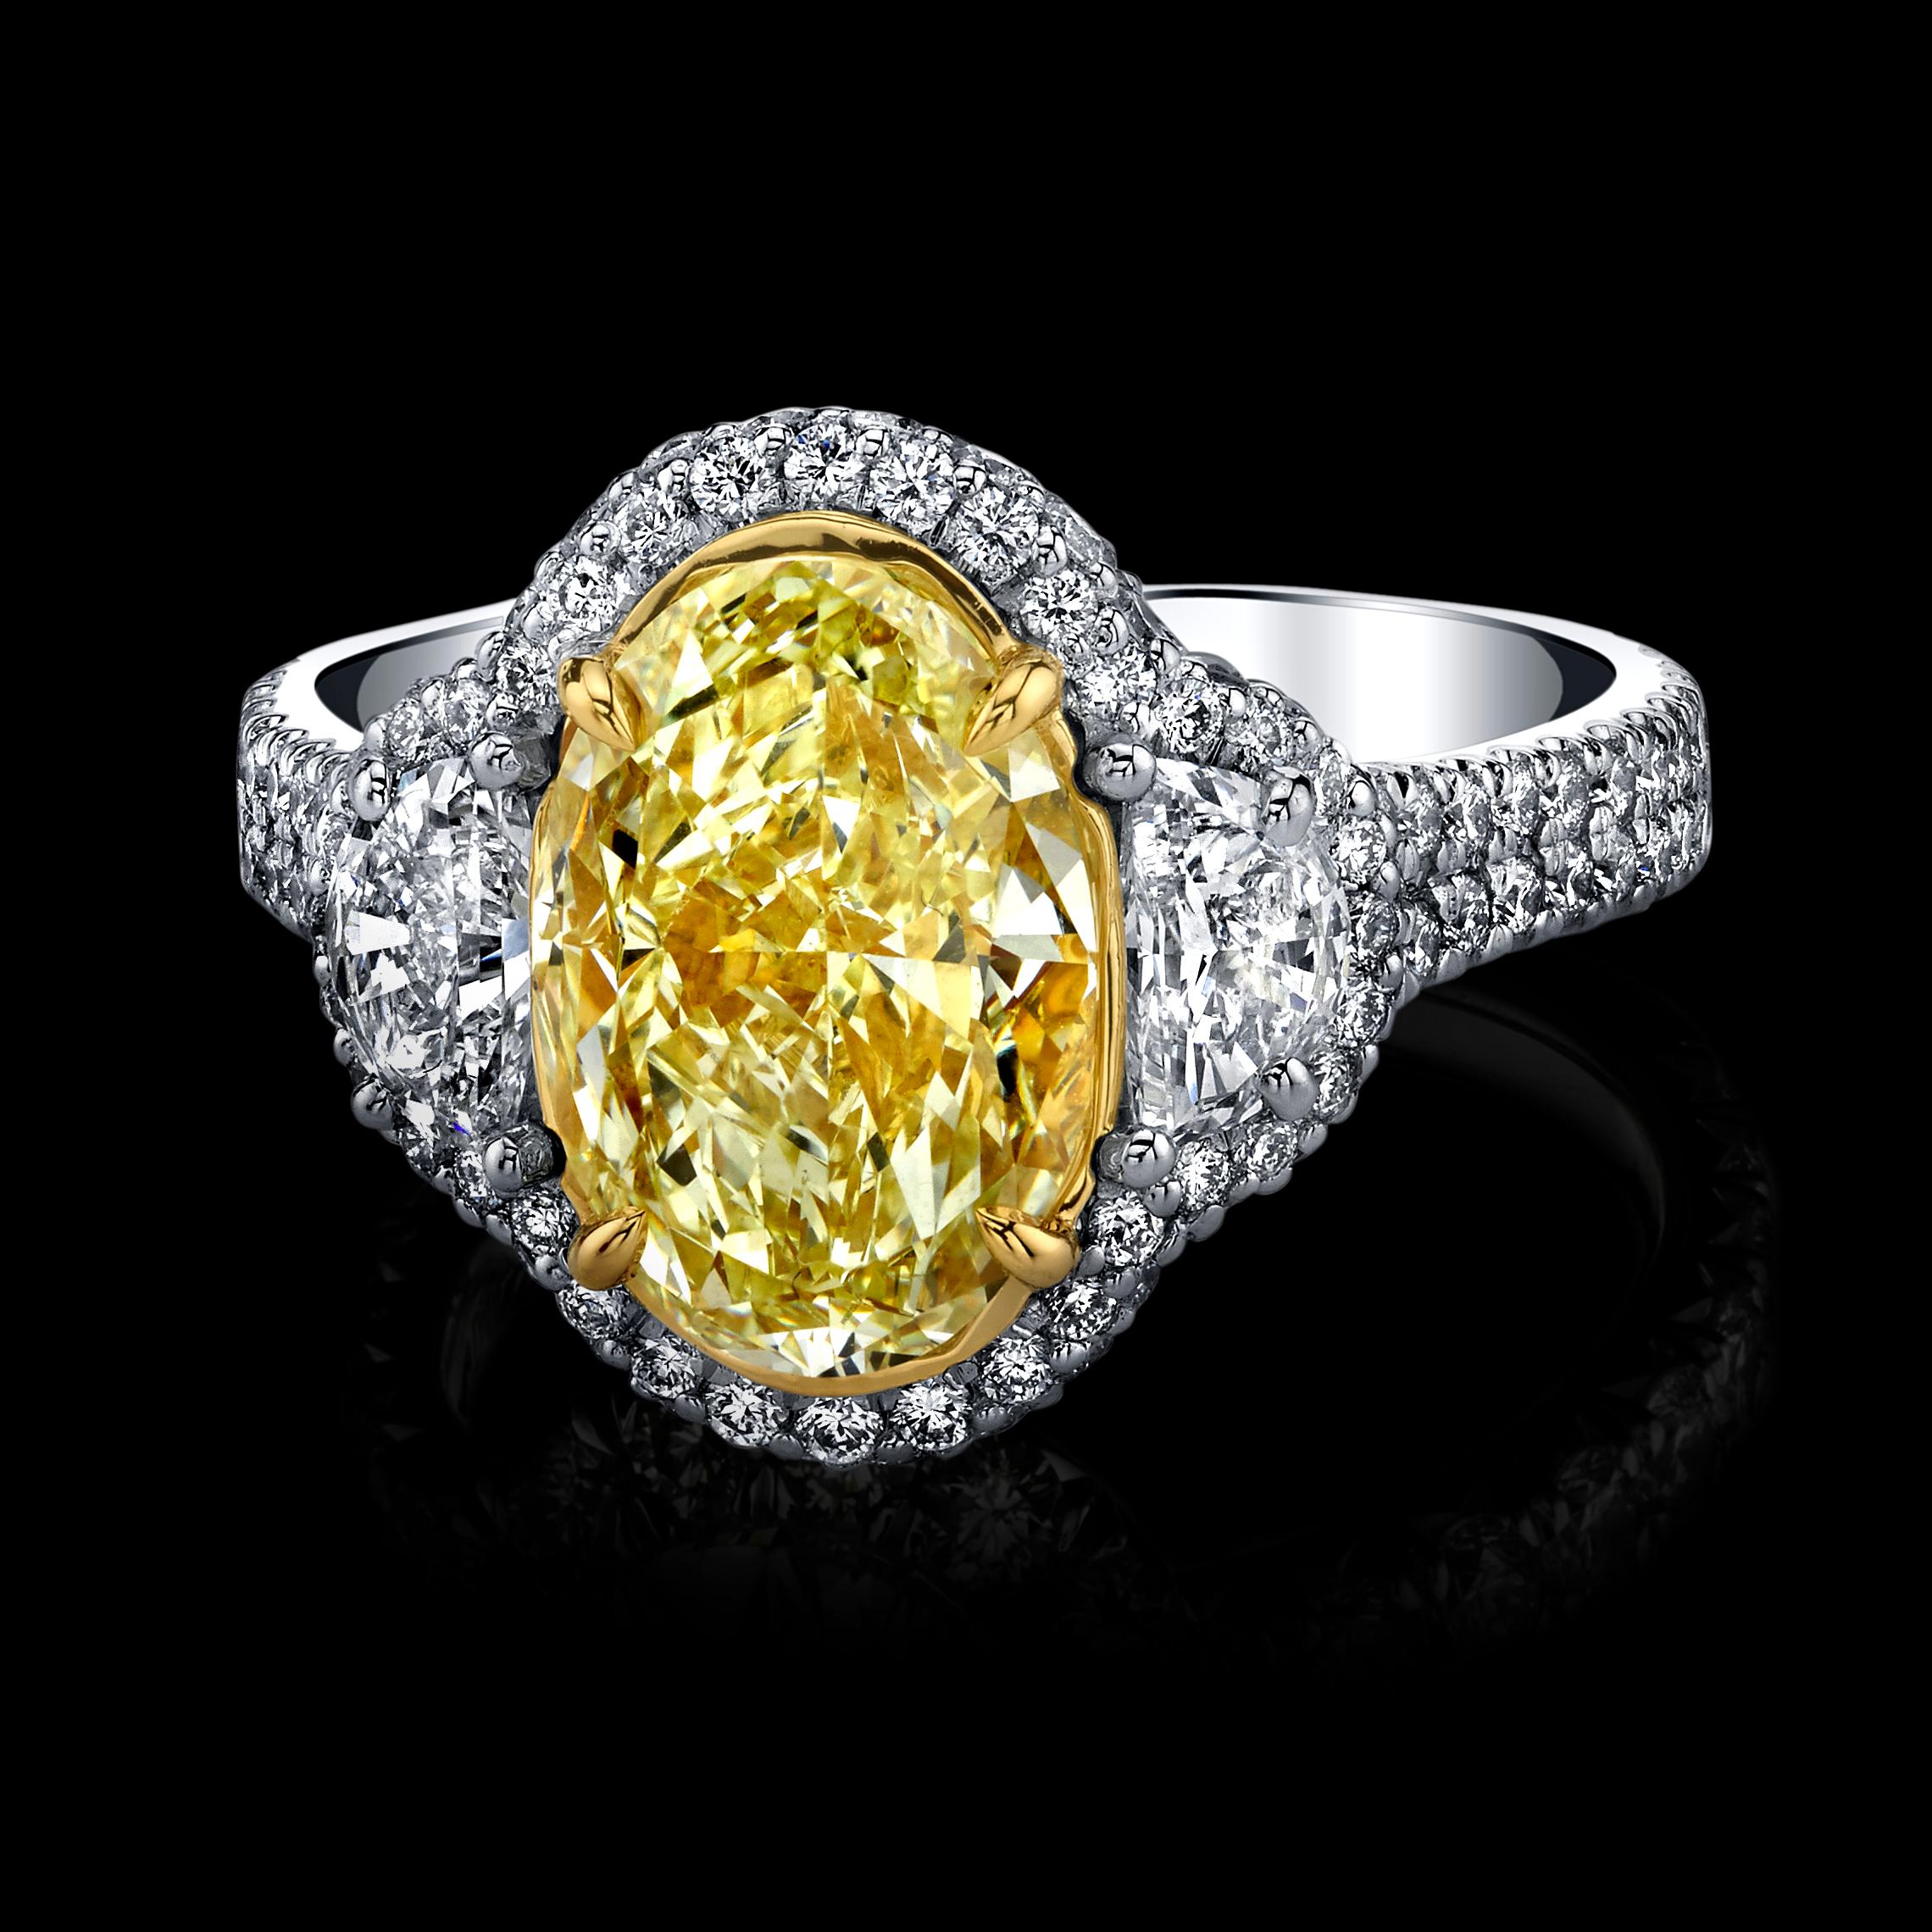 A fabulous 3.30ct Oval Fancy Yellow Natural Diamond with 2 Colorless Half Moon Shapes totaling 0.55cts and a Halo of Natural Round Colorless Diamonds totaling 0.90cts.

This diamond is EGL certified.